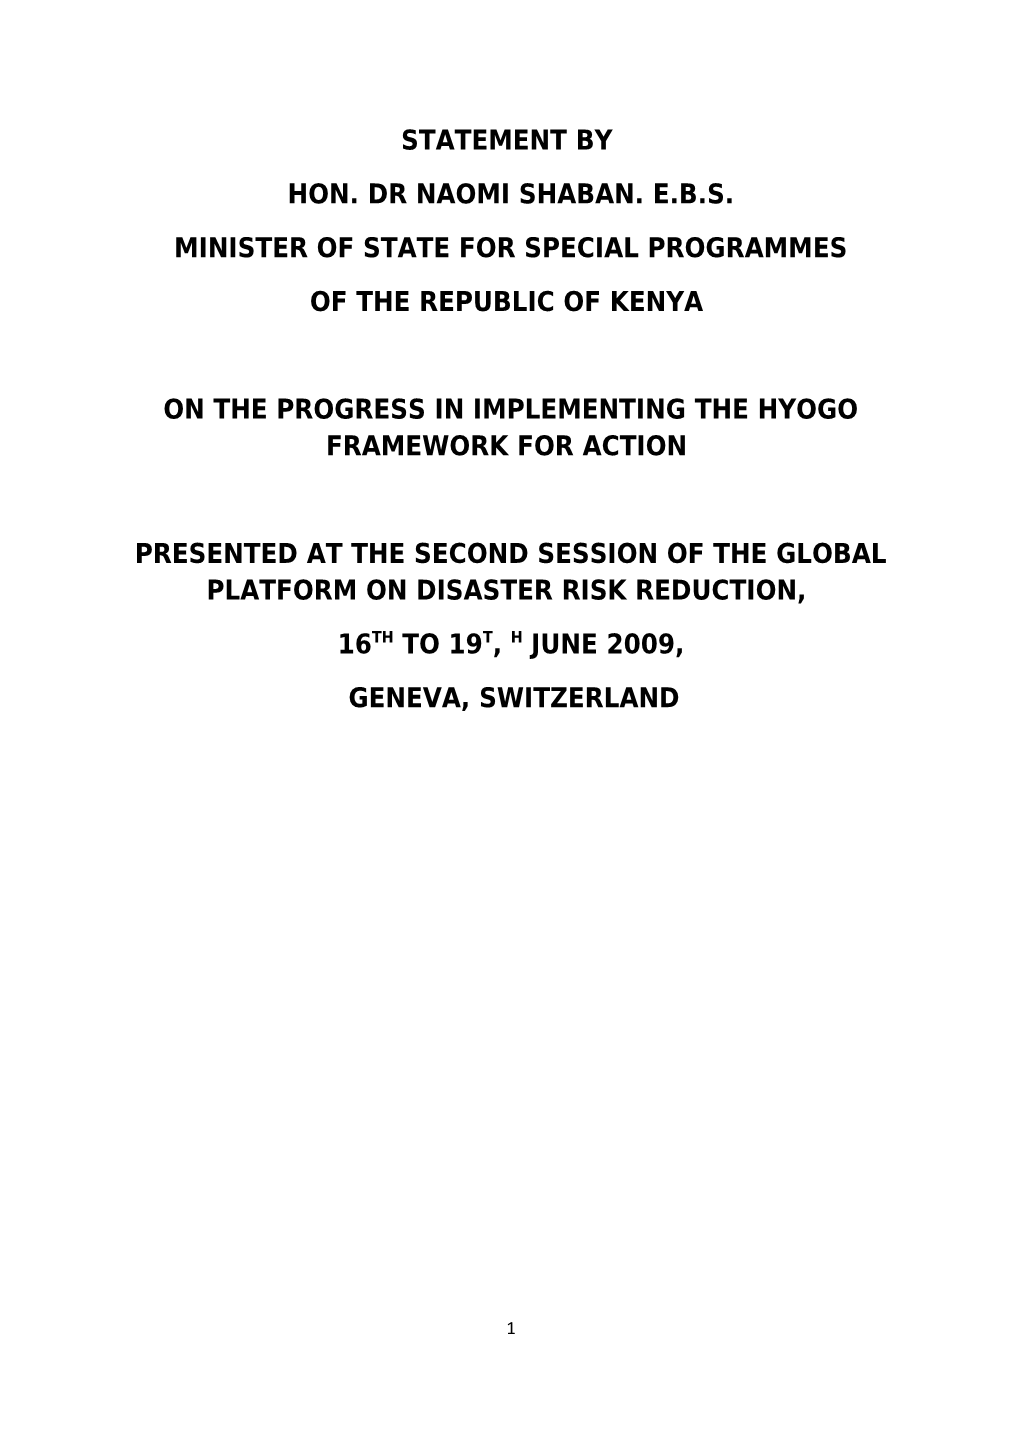 Minister of State for Special Programmes